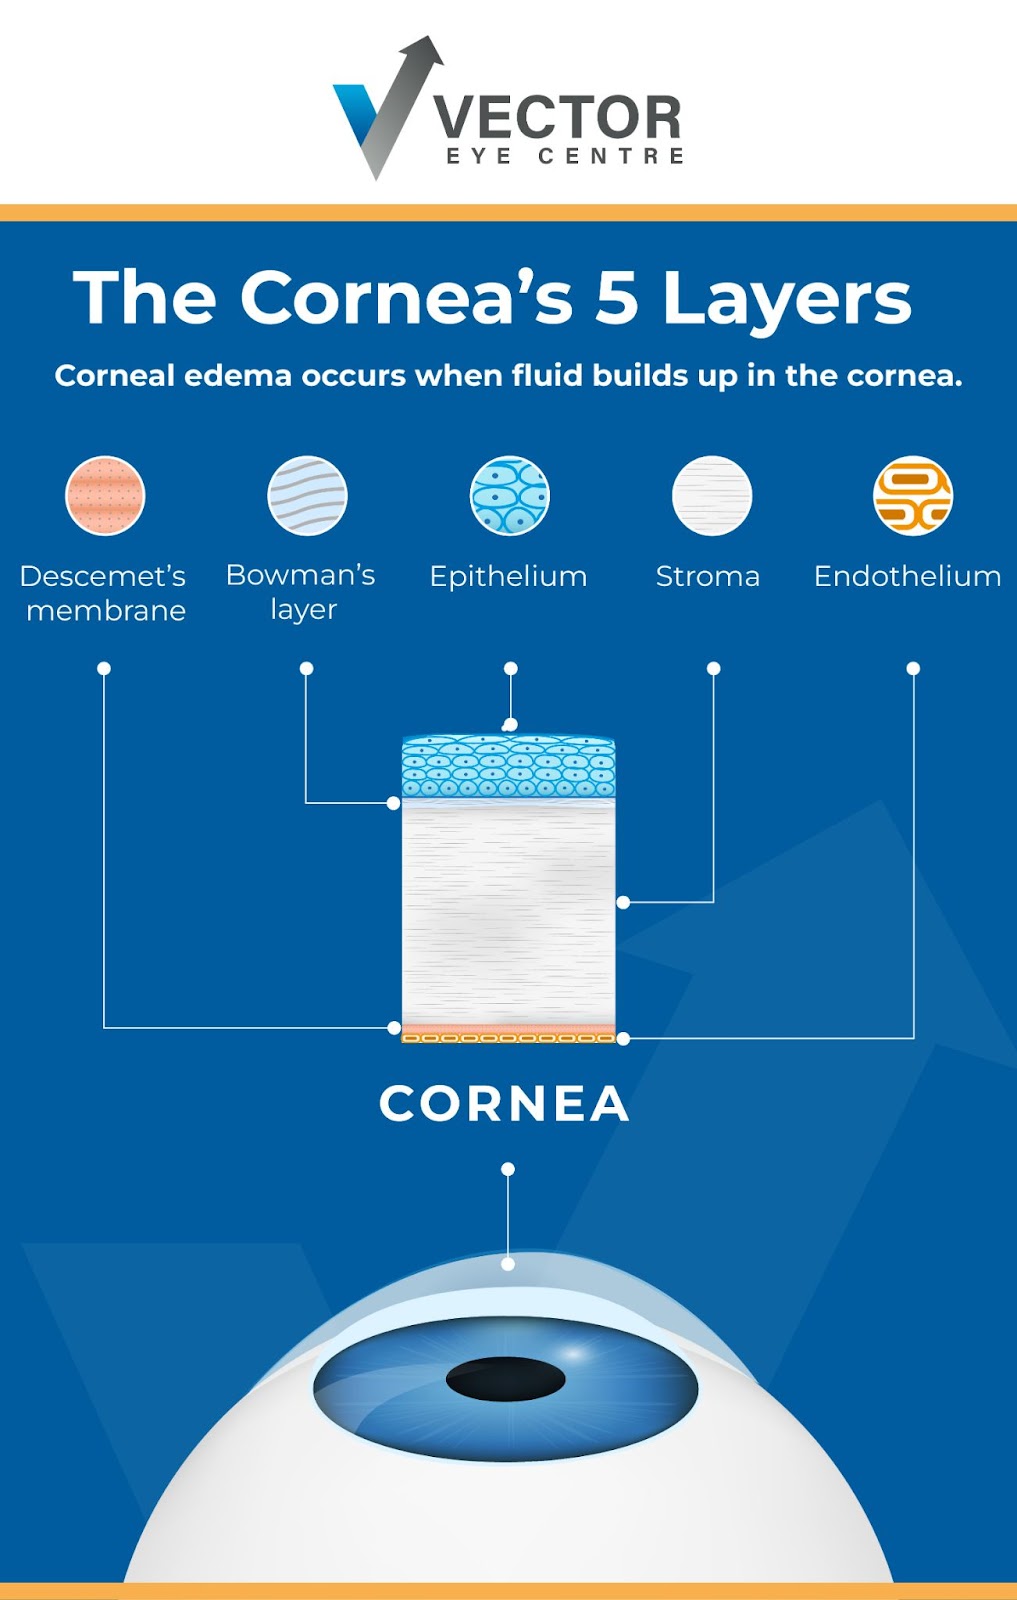 A pictorial representation of the 5 layers of the cornea.